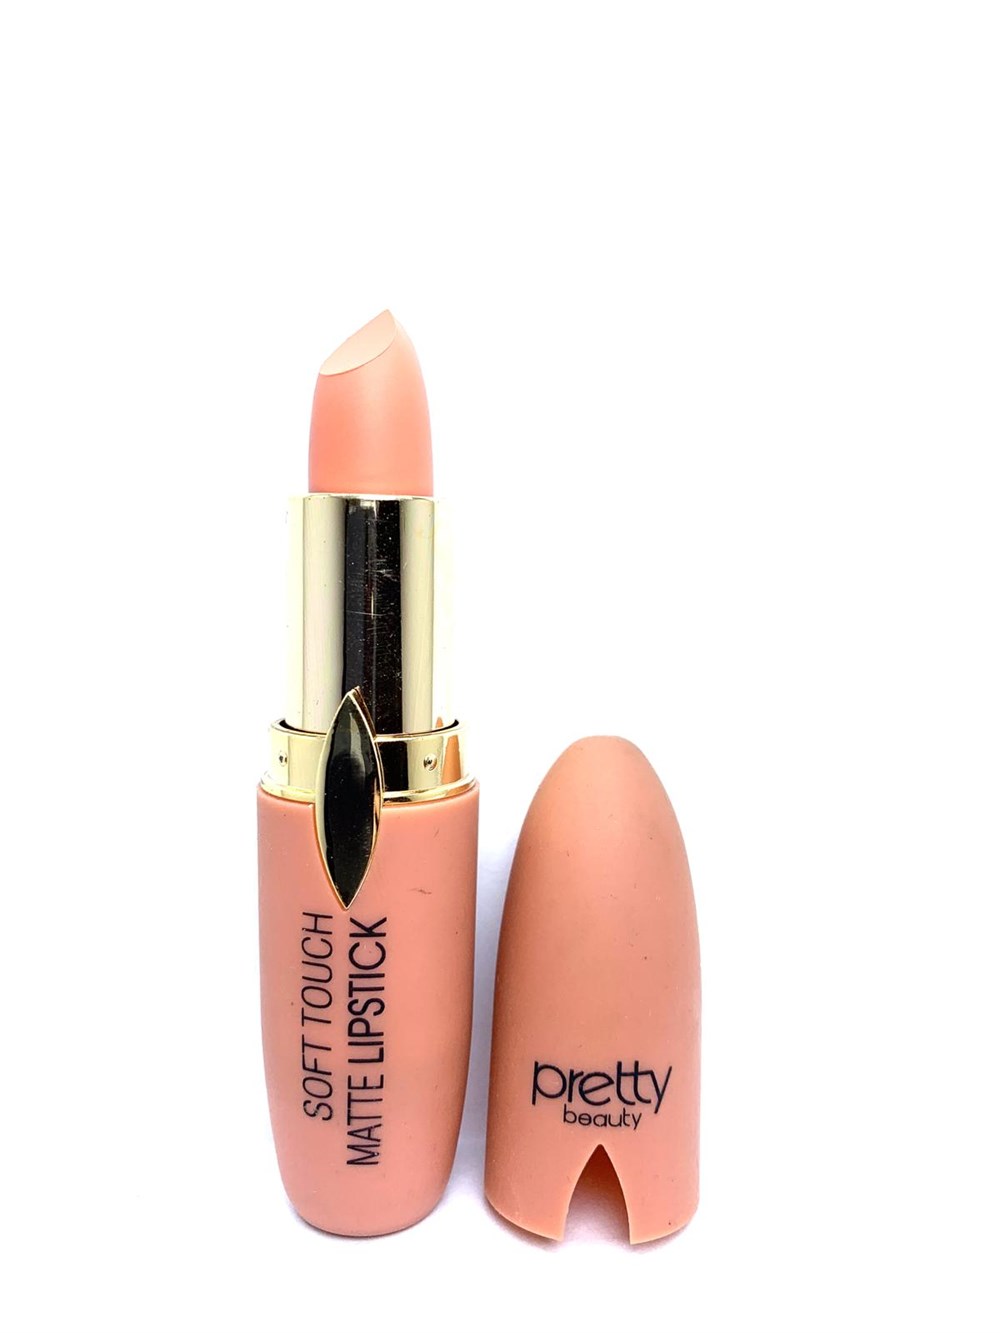 Pretty Beauty Soft Touch Lipstick 01 | Cossta Cosmetic Station